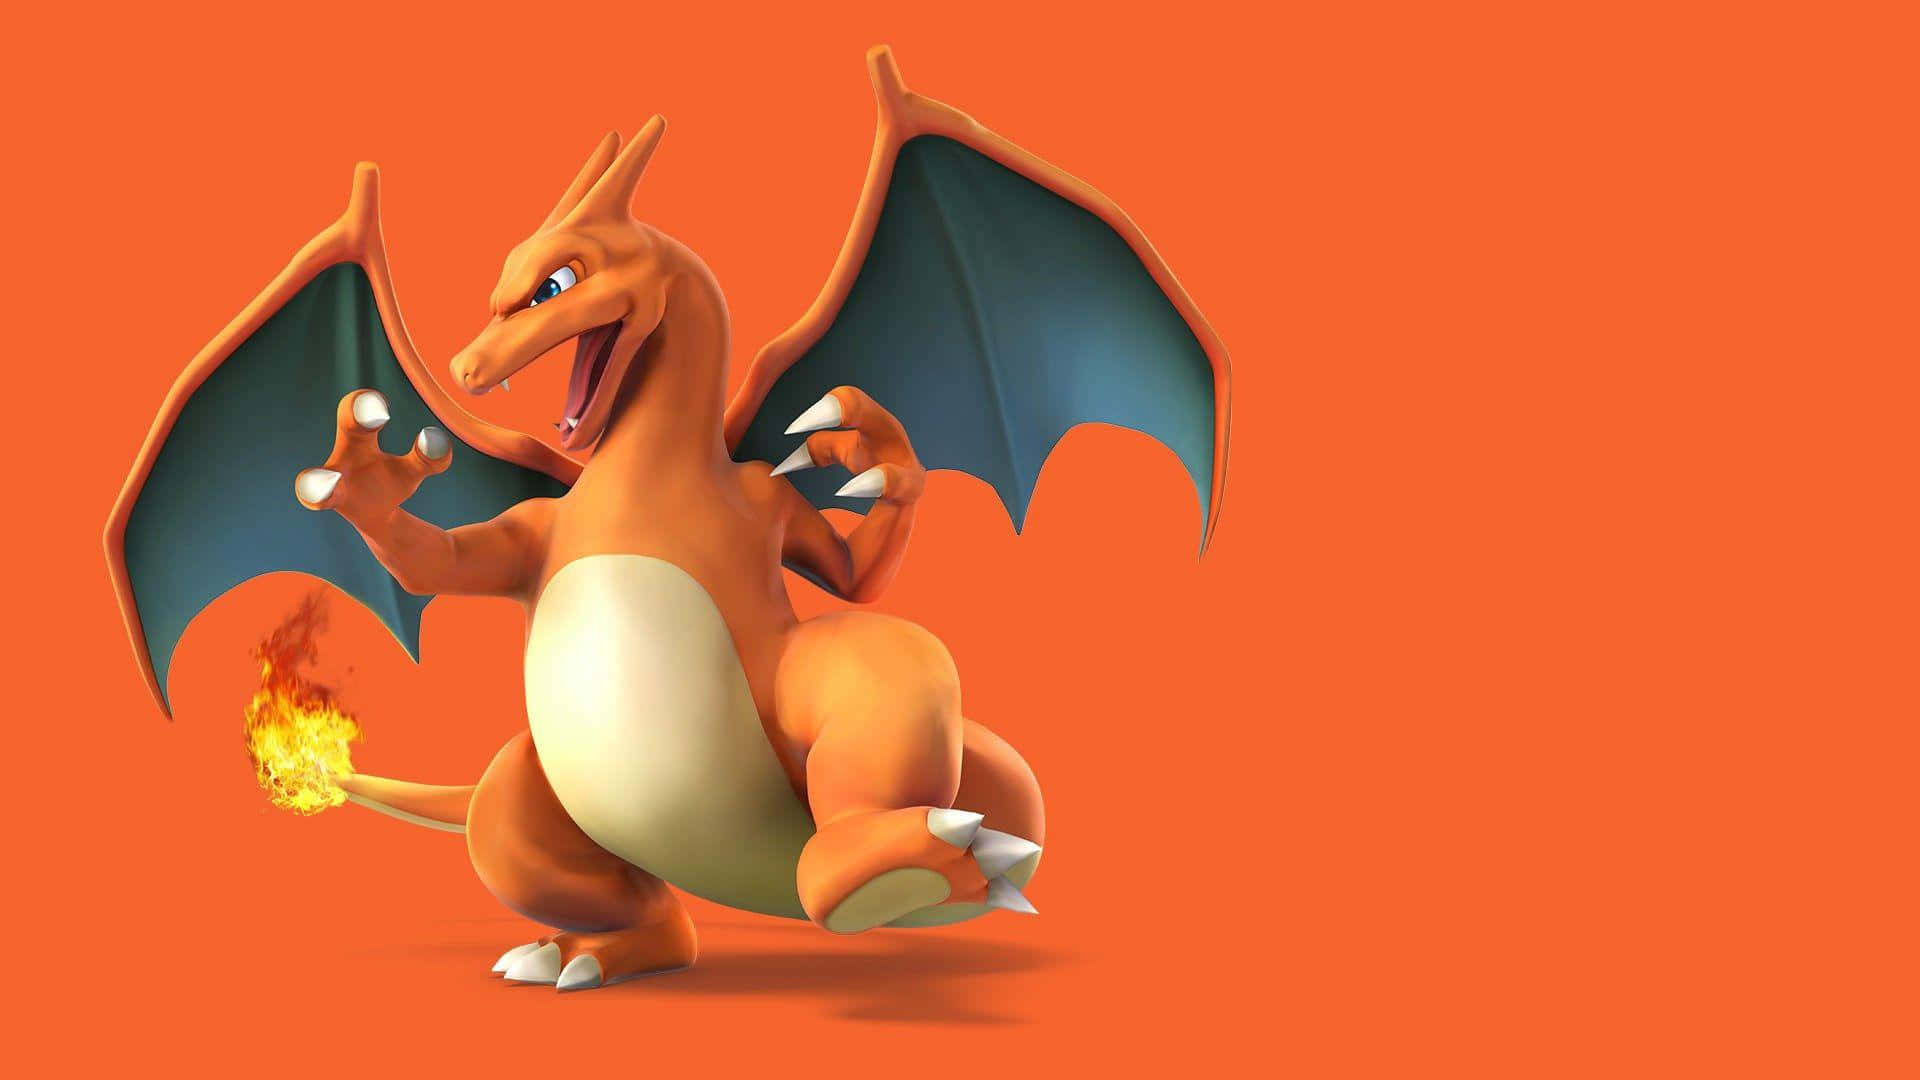 Charizard unleashes its fiery potential in this epic wallpaper